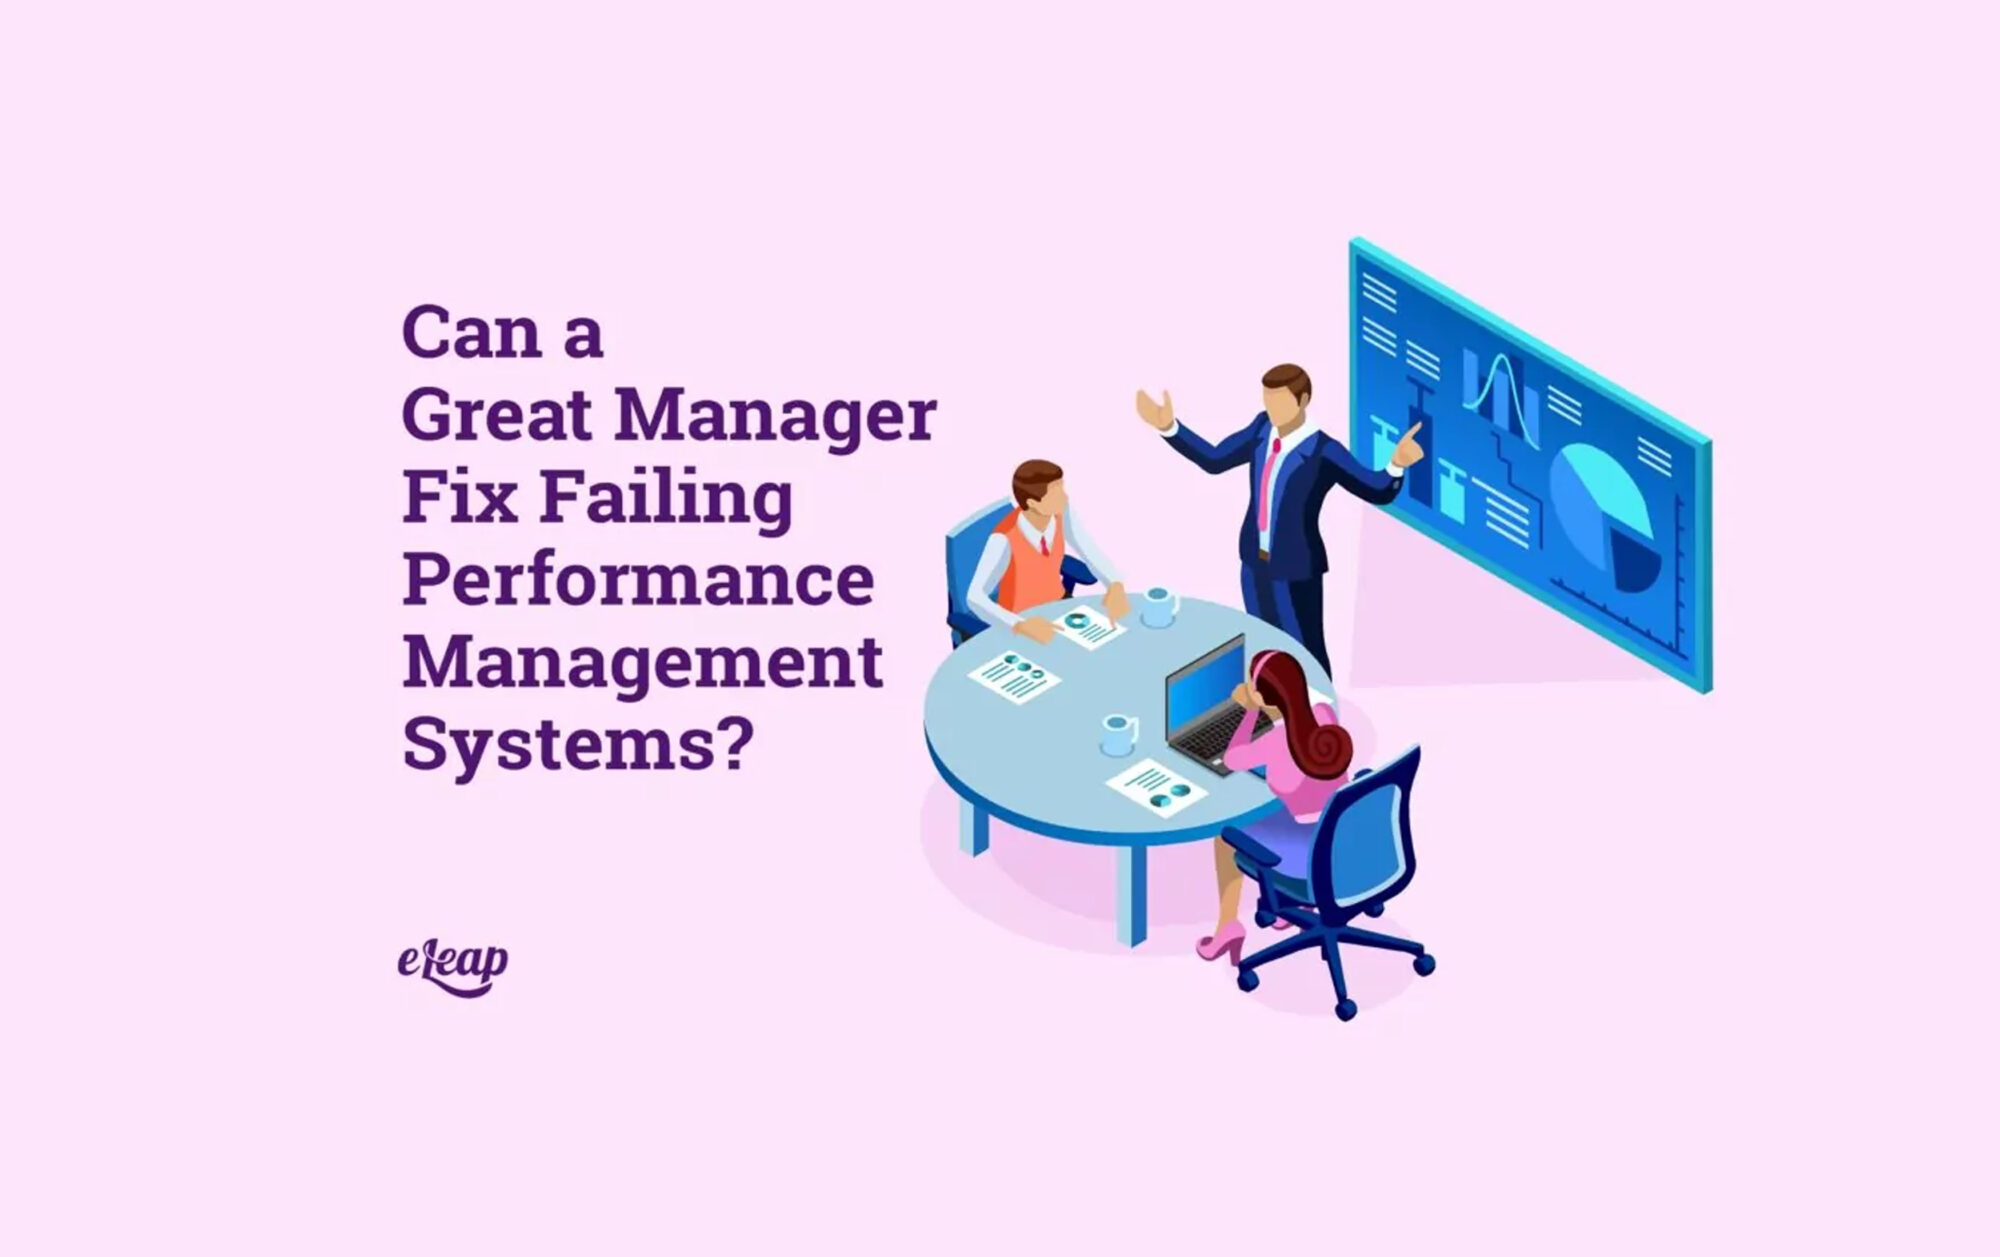 Can a Great Manager Fix Failing Performance Management Systems?